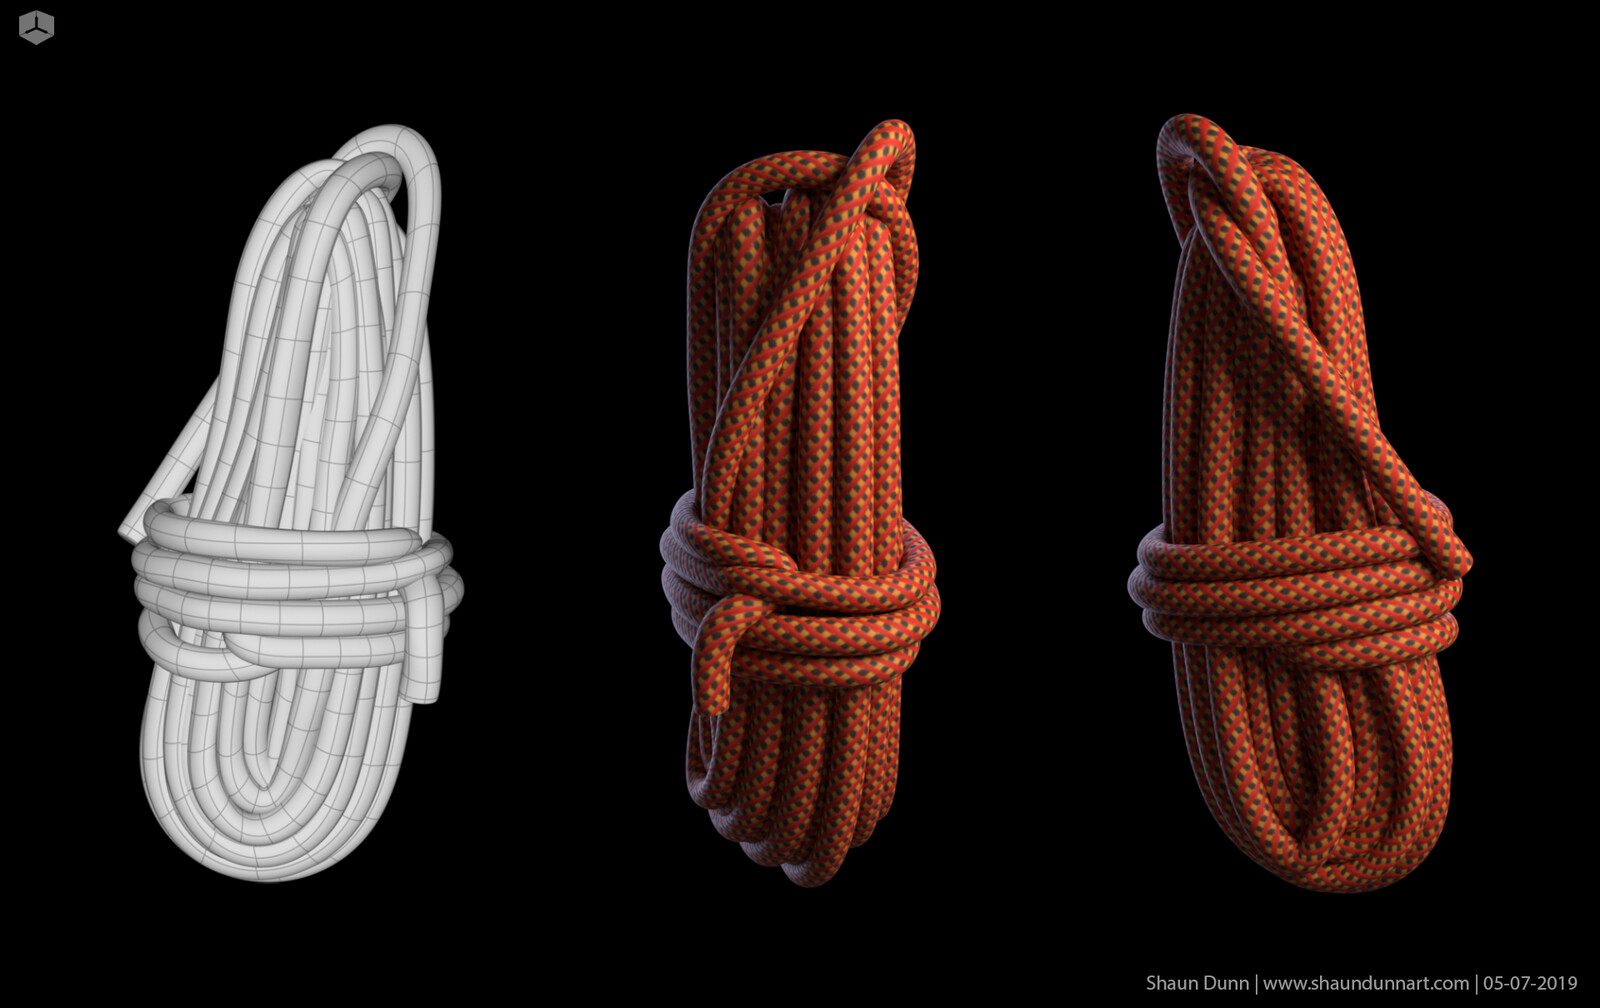 This climbing rope was pretty tricky to model at least to make it look almost exactly like the prop from the film UP with only a few images for reference.